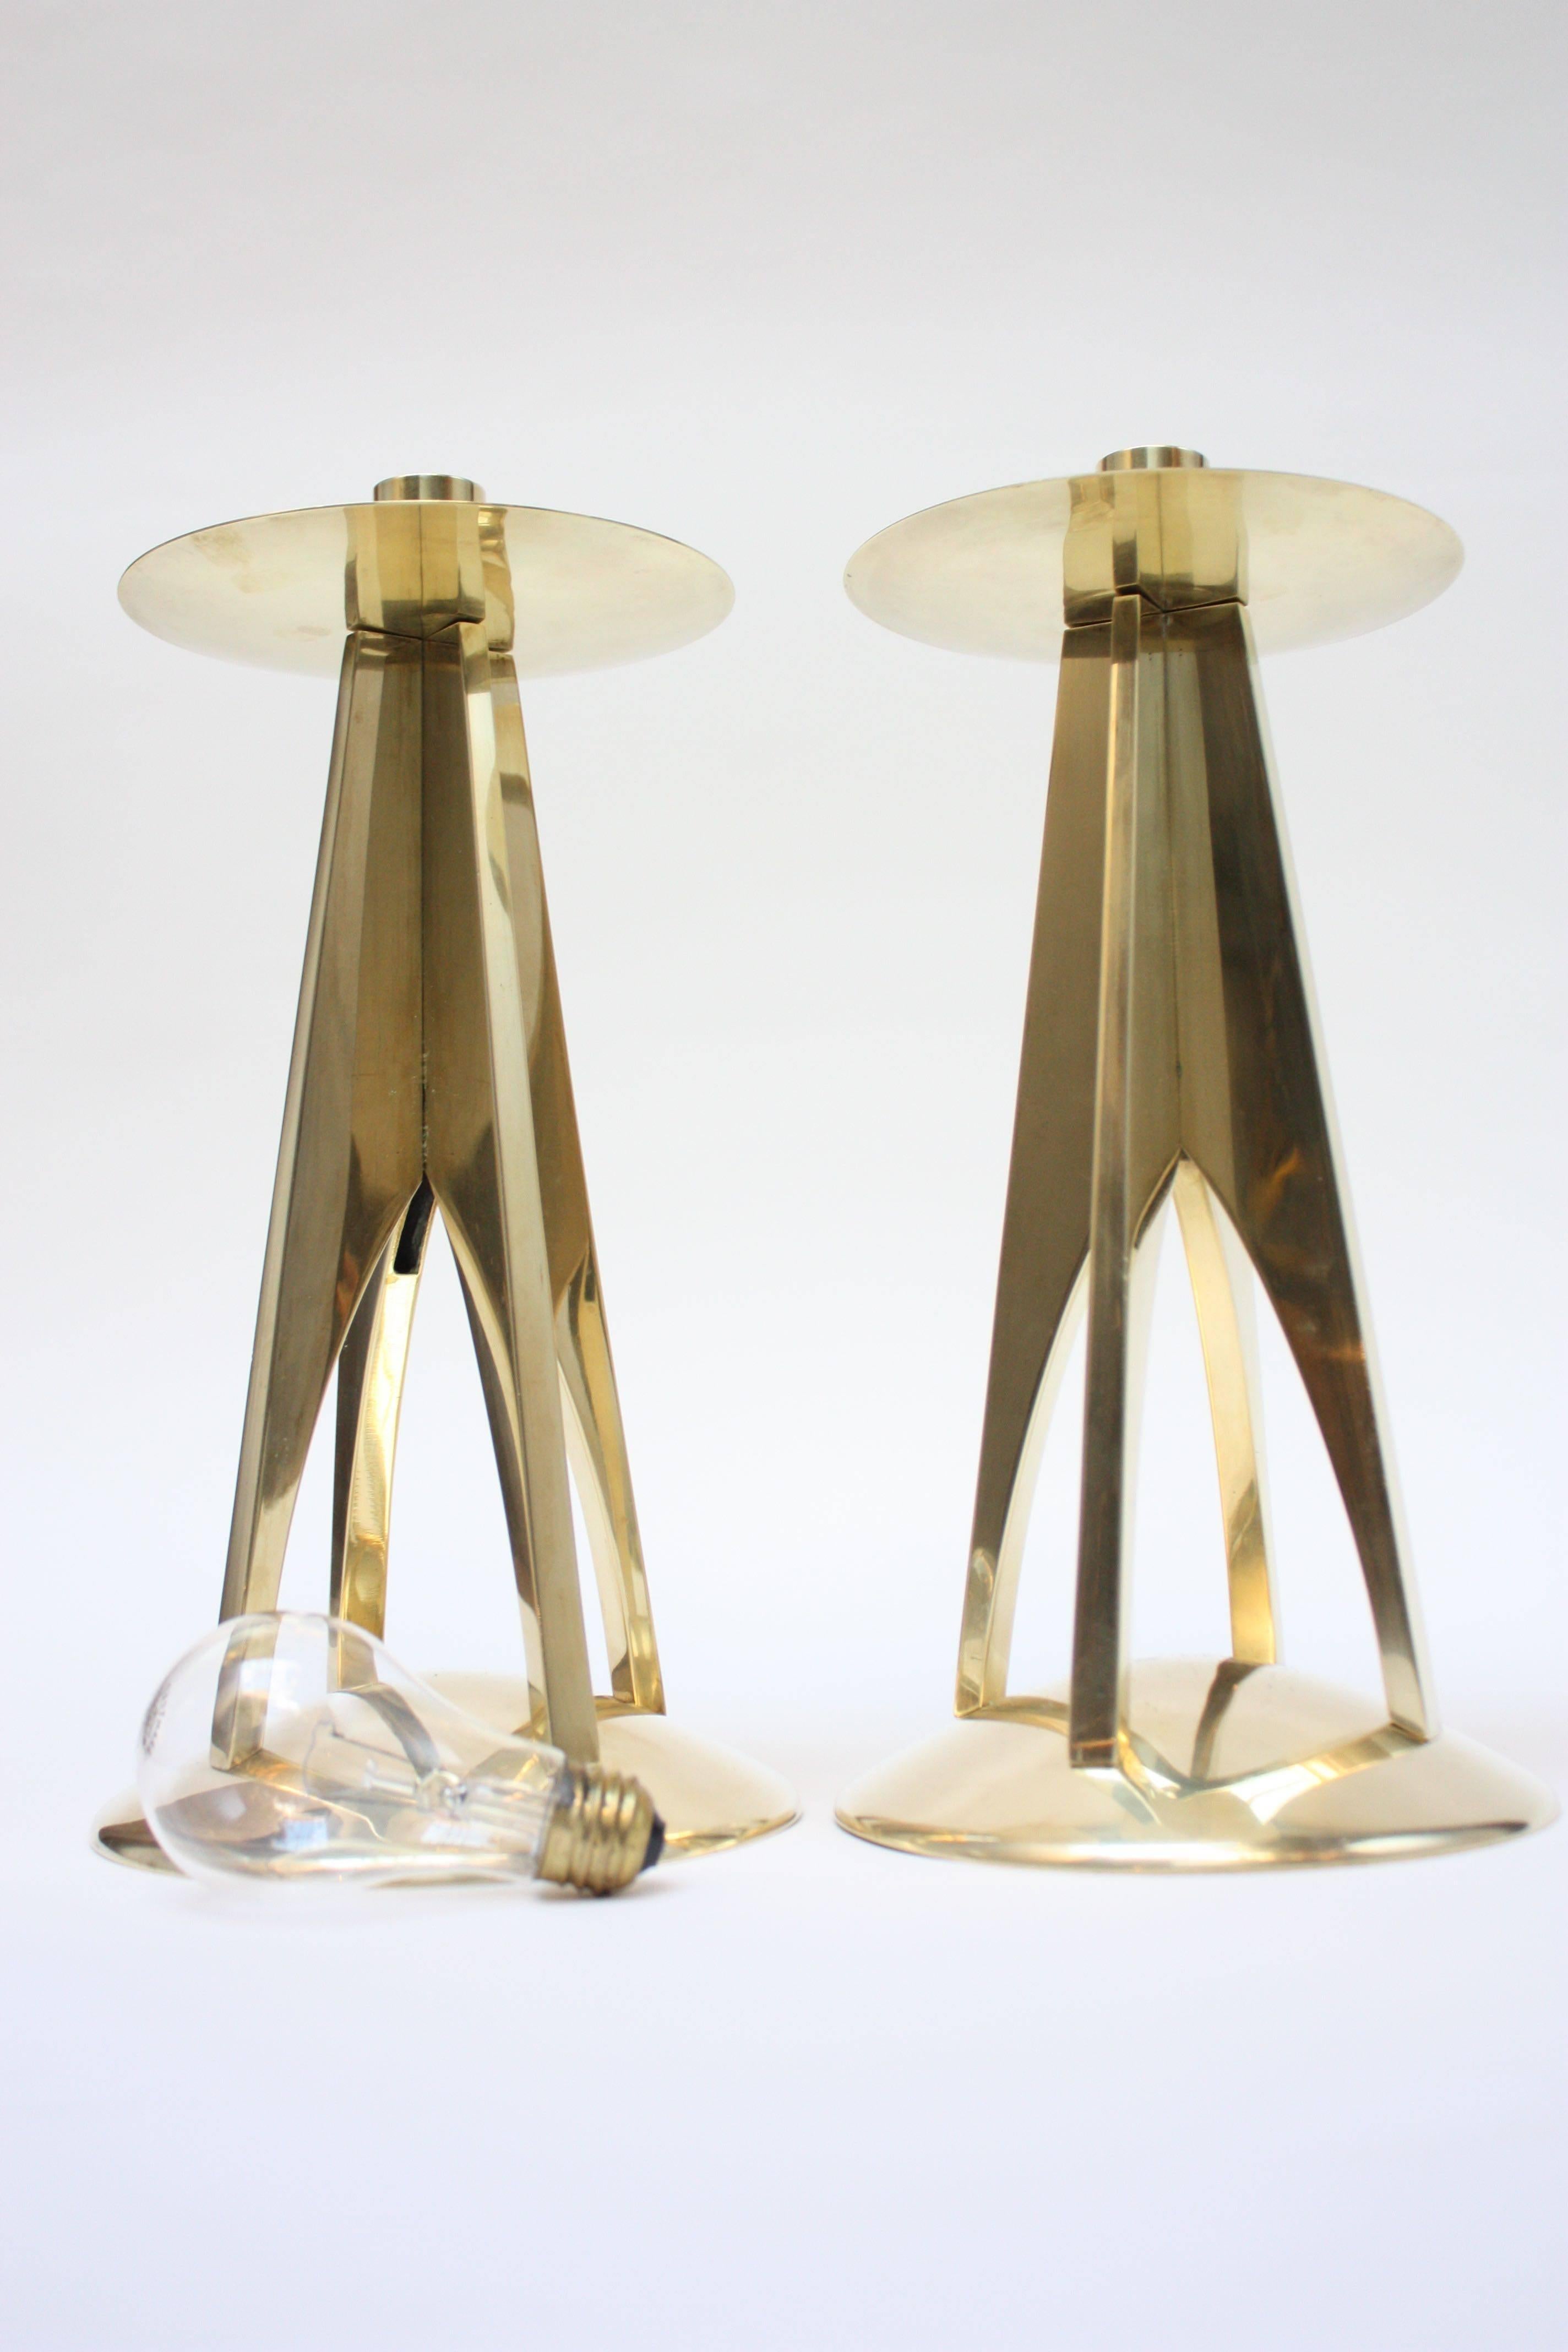 Substantial pair of polished brass American Modern candlesticks. Sculptural form and impressive size. (Standard lightbulb present in photo for scale.) Accommodates a candle 1" in diameter.